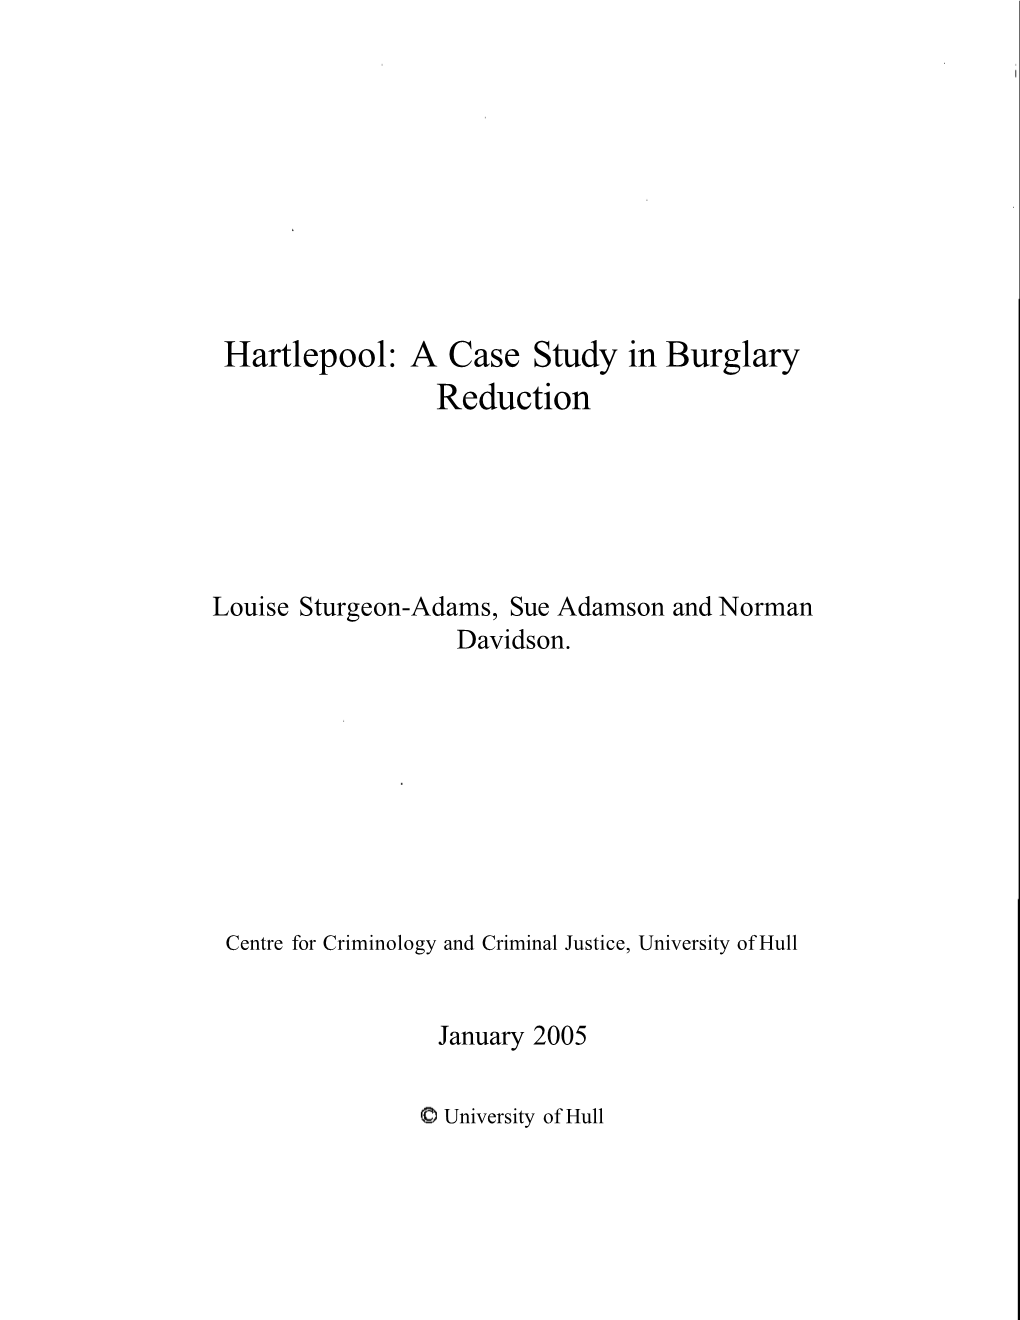 Hartlepool: a Case Study in Burglary Reduction